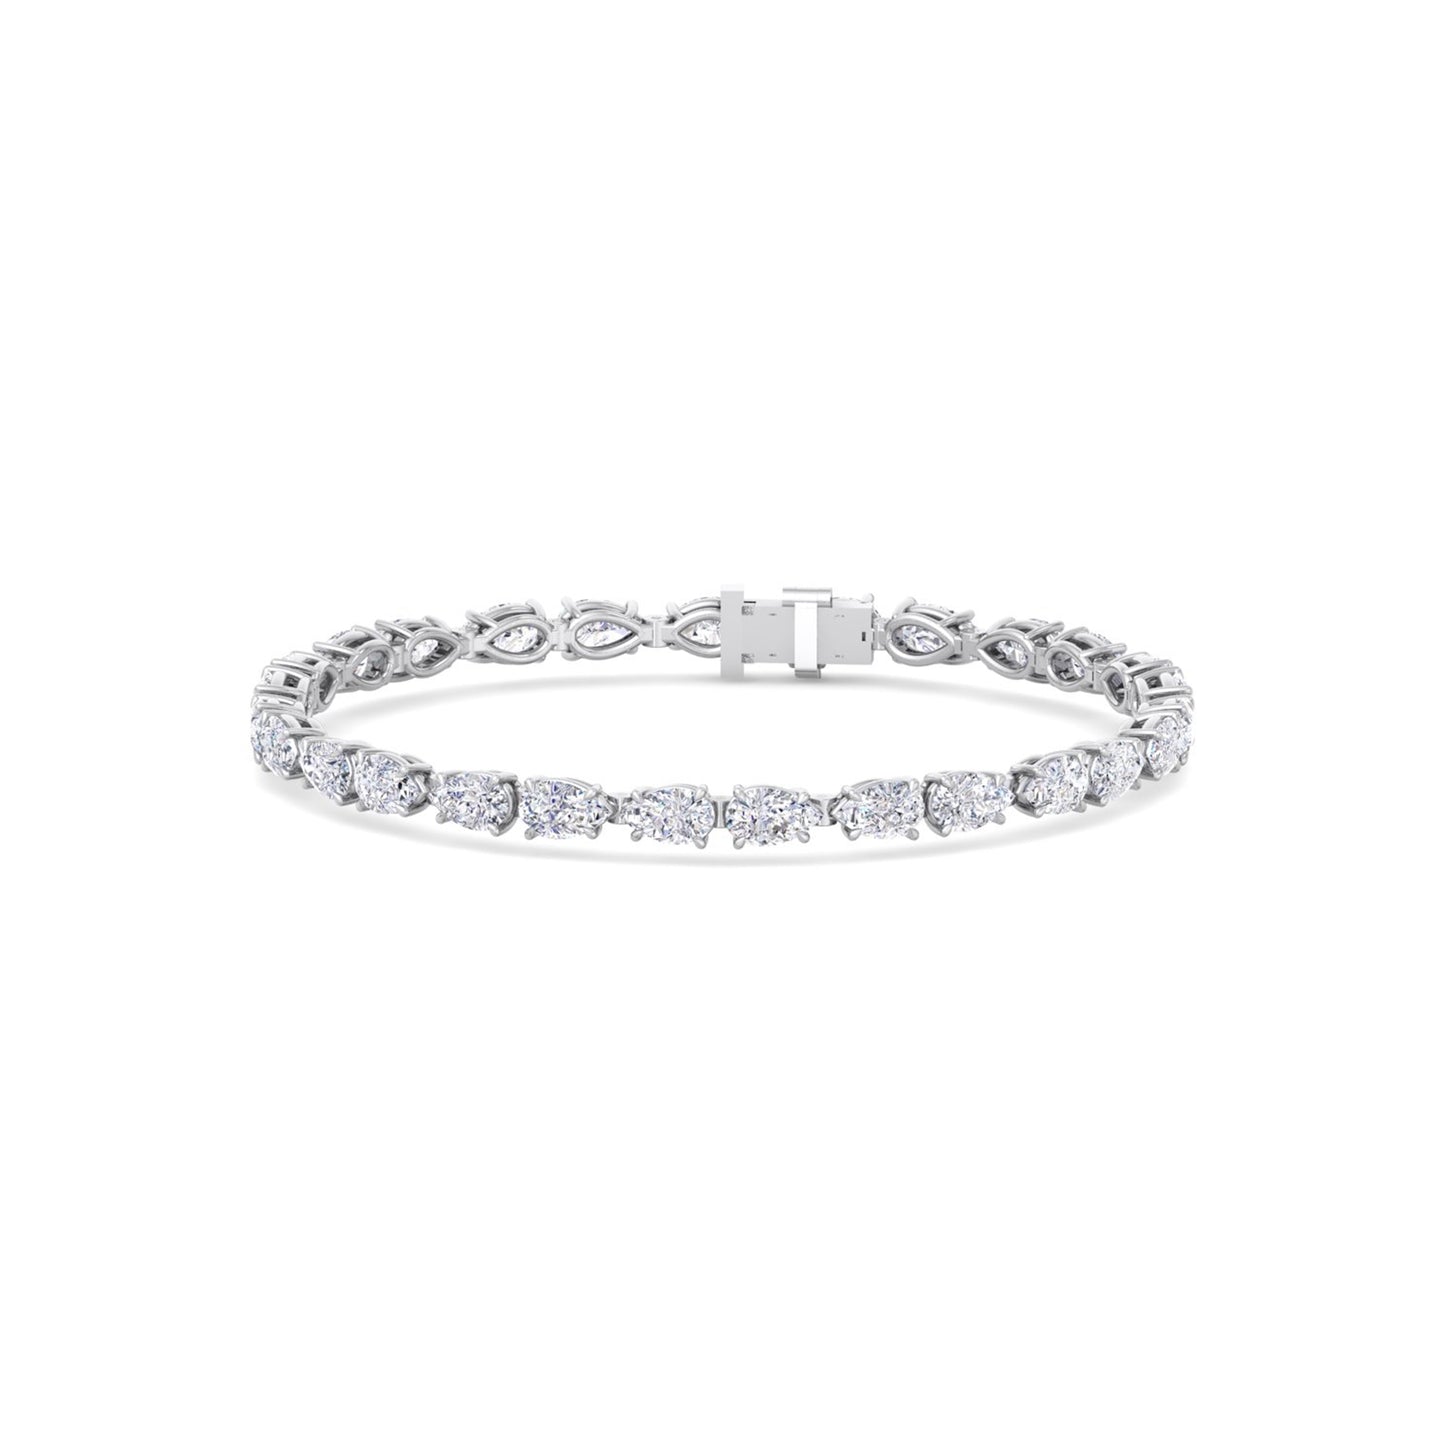 Pearlescent Radiance: Elevate Your Style with Our Lab Grown Diamond Bracelet in Captivating Pear Shape!